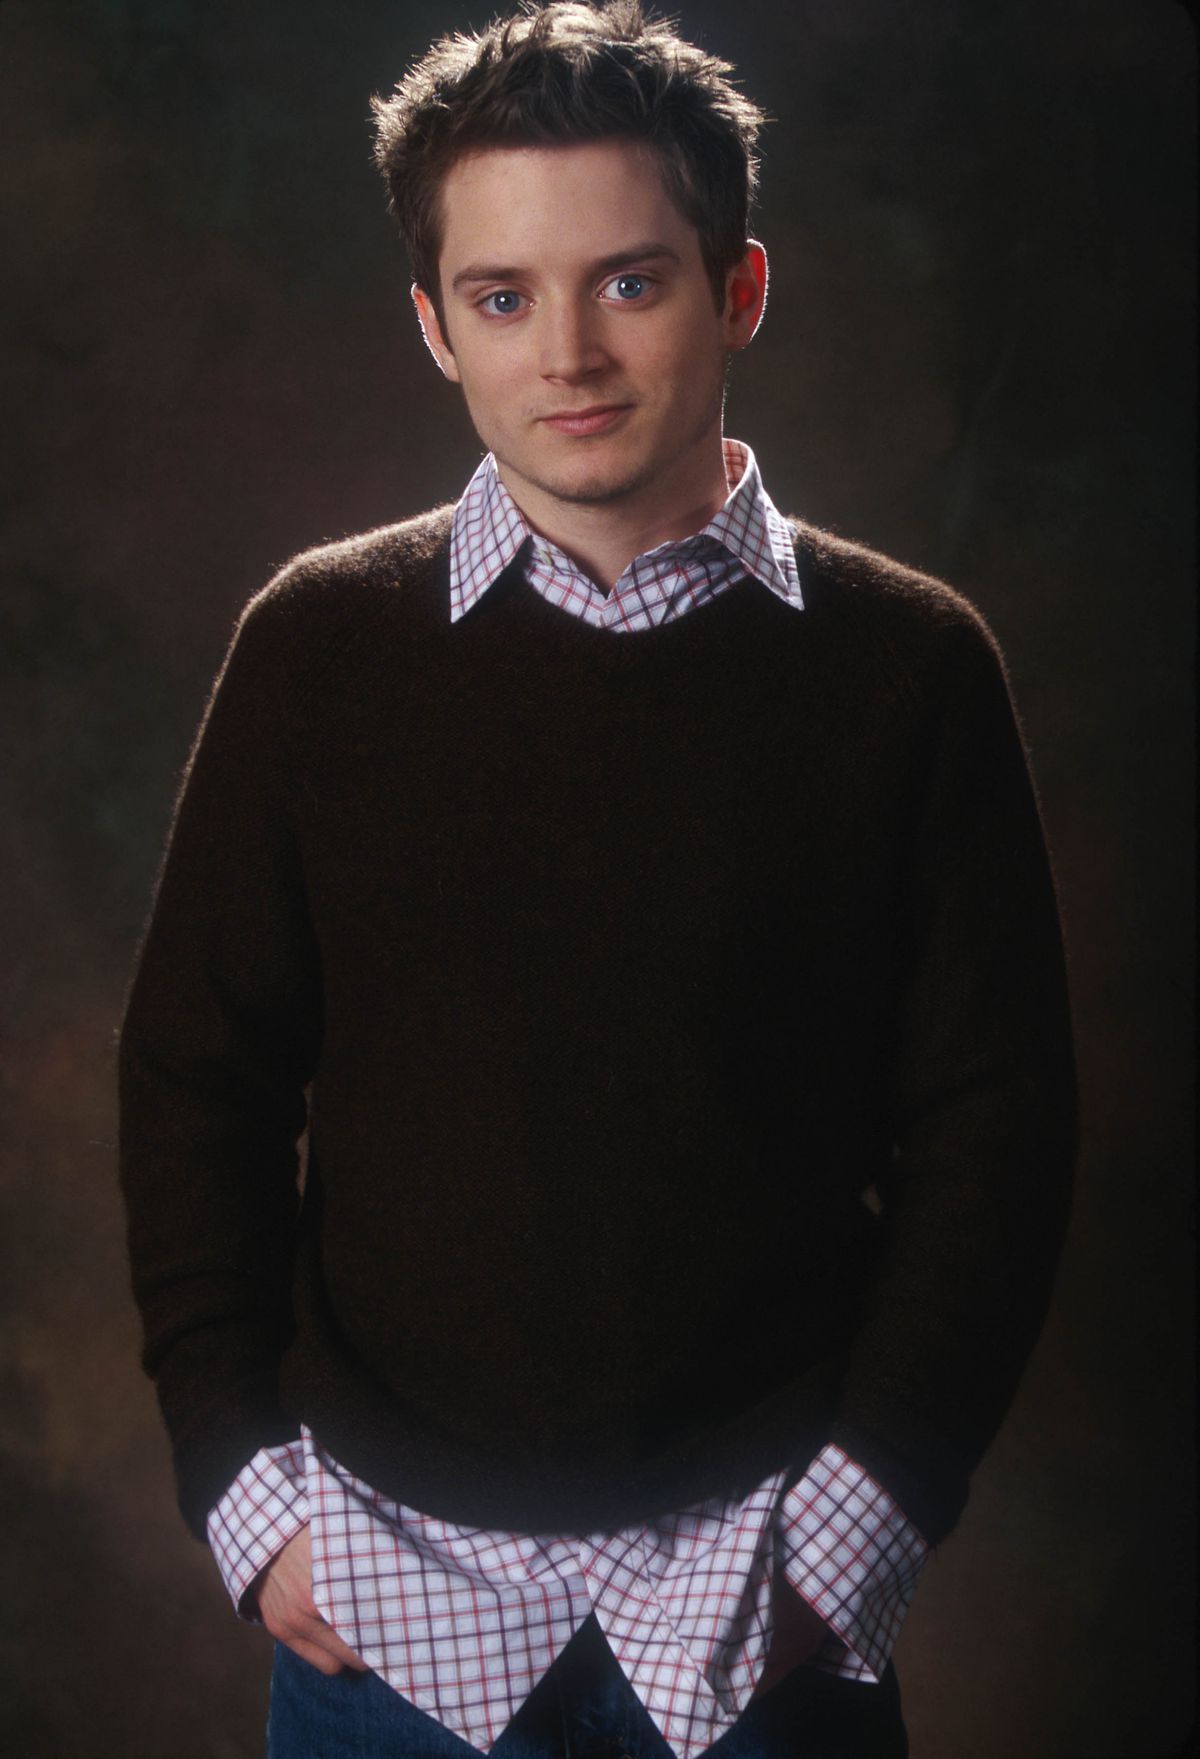 Lord Of The Rings cast - Elijah Wood portrait